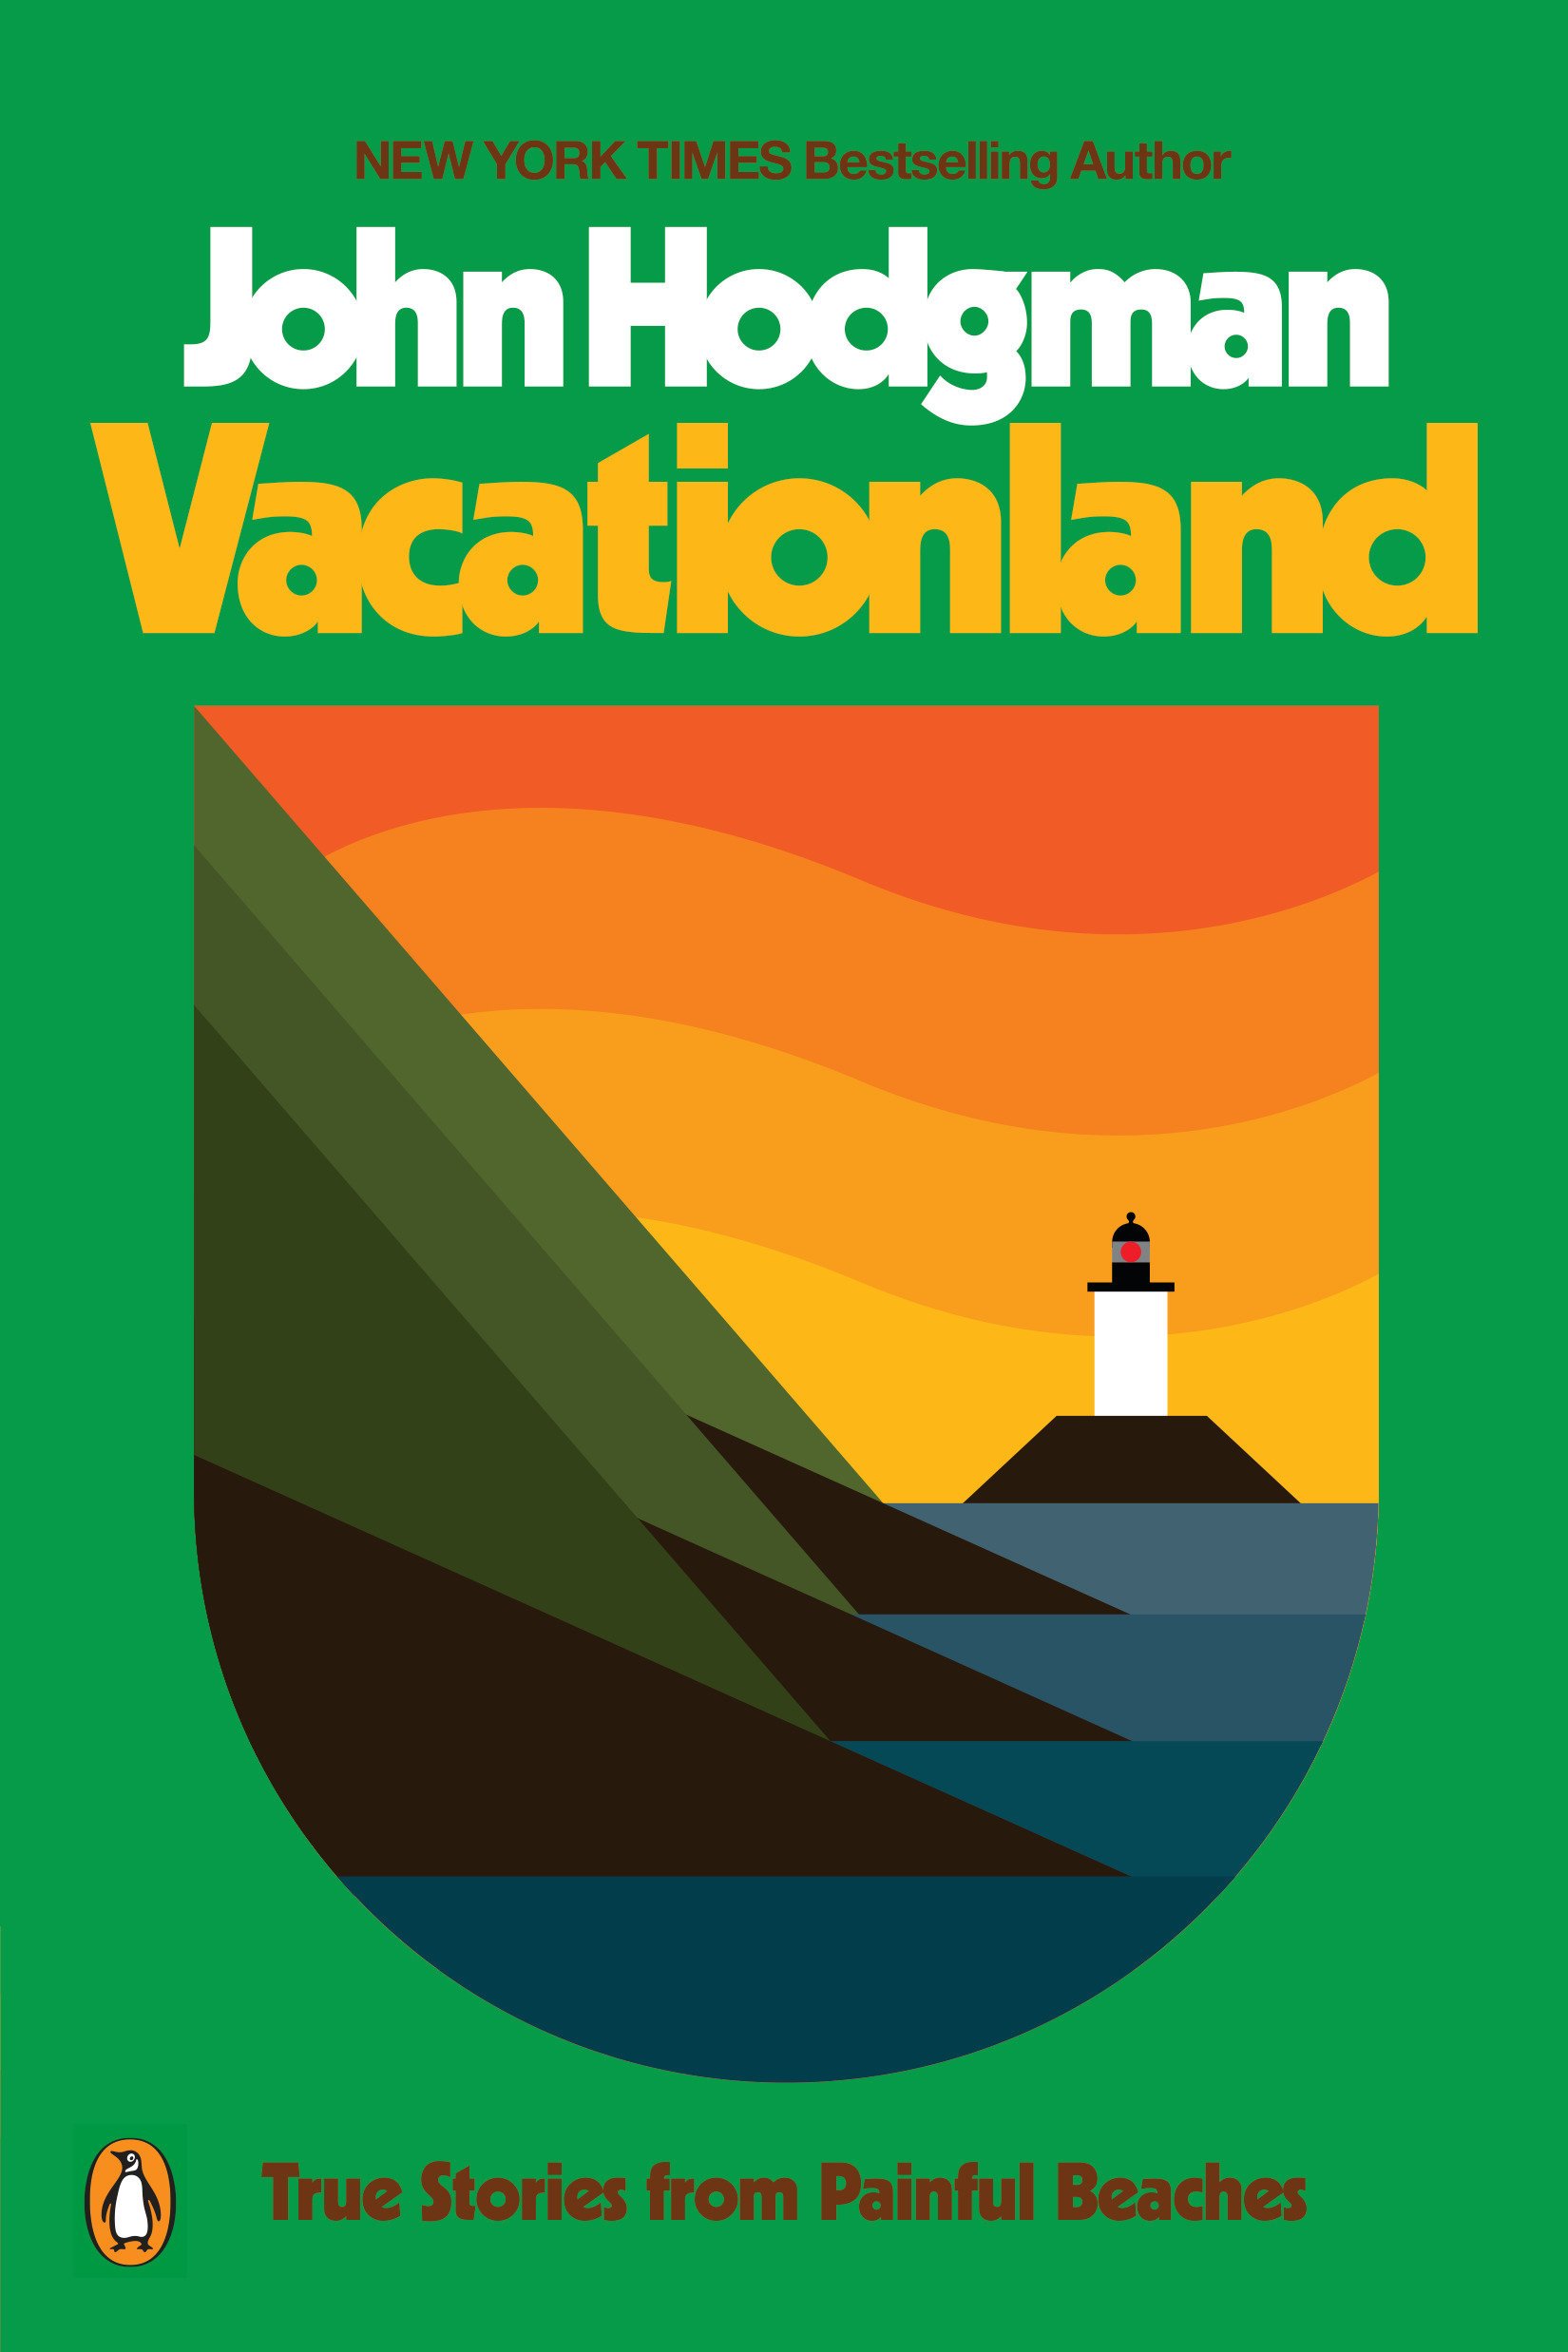 'Vacationland: True Stories From Painful Beaches' by John Hodgman